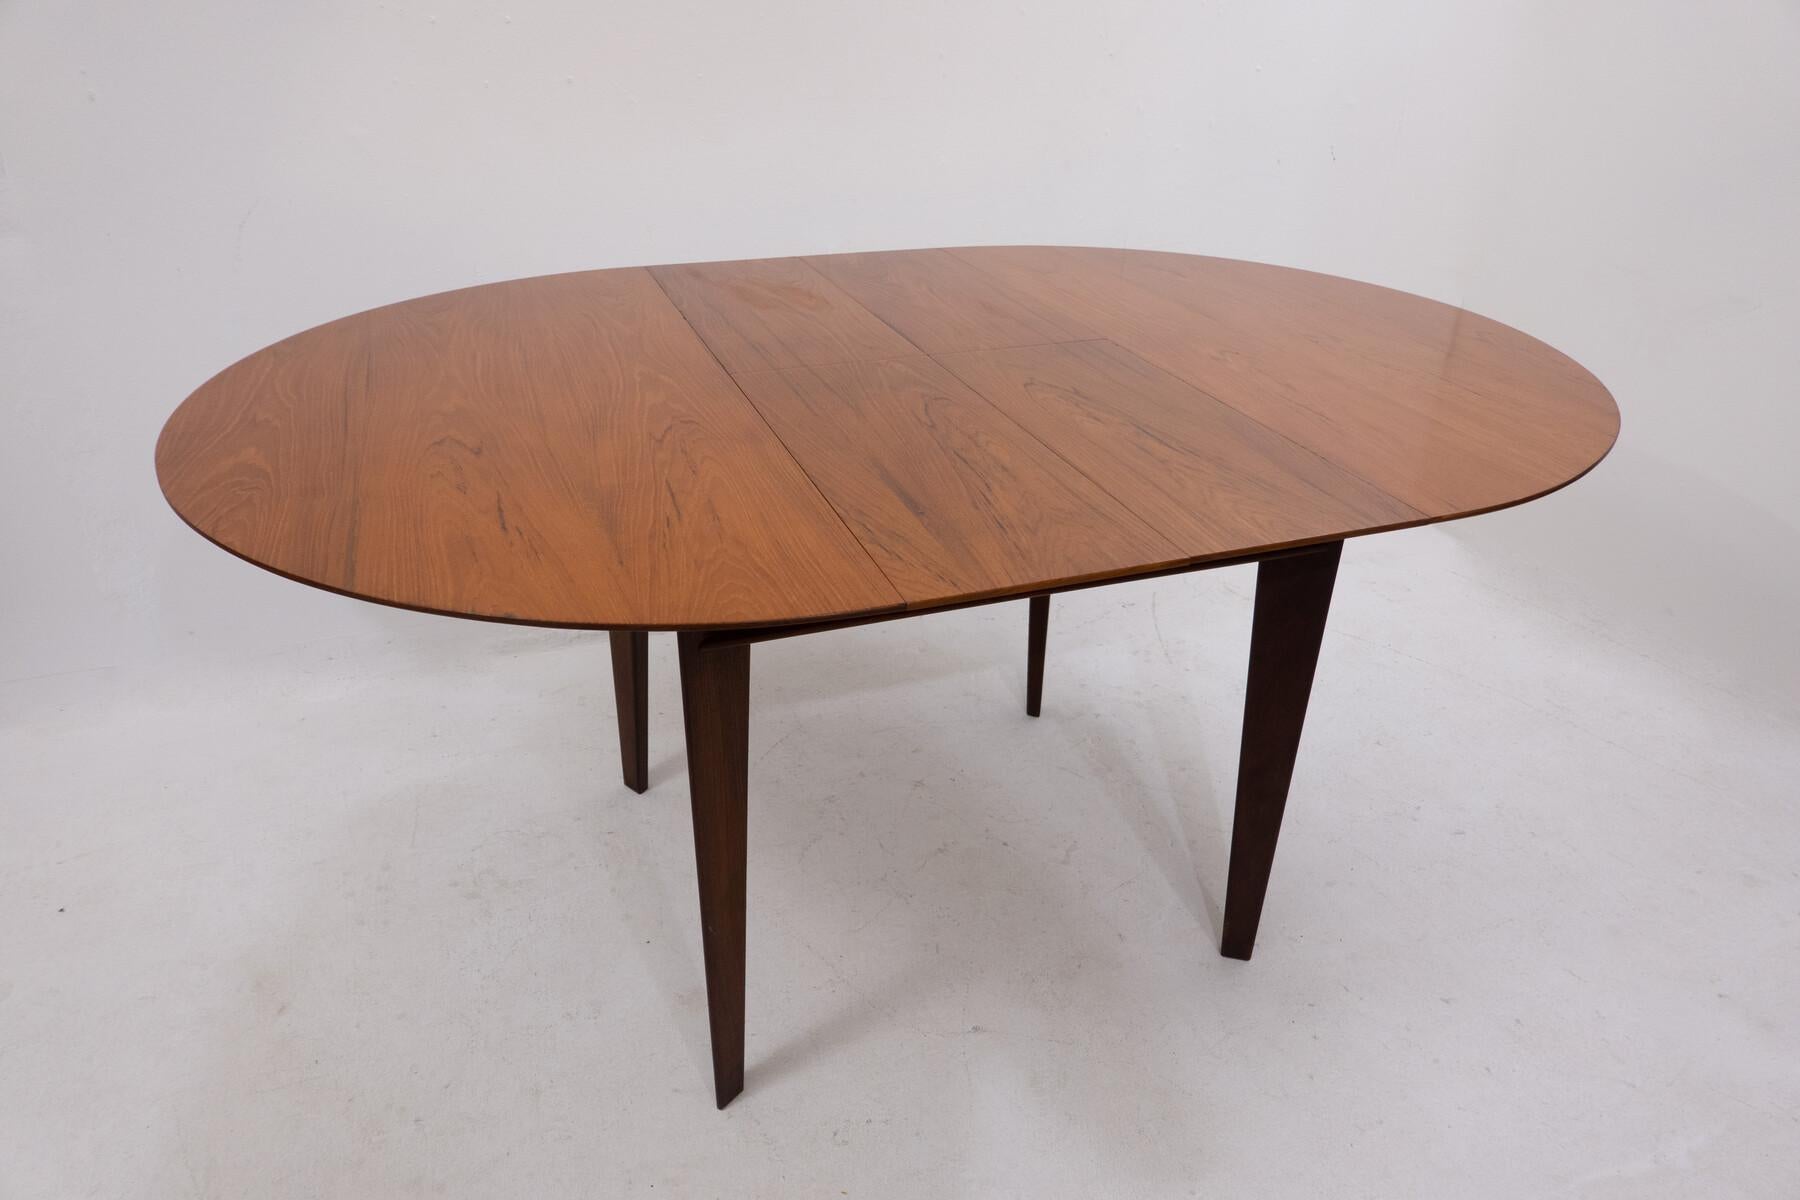 Mid-Century Modern Extending Dining Table by Vittorio Dassi, Teak, Italy, 1950s For Sale 2